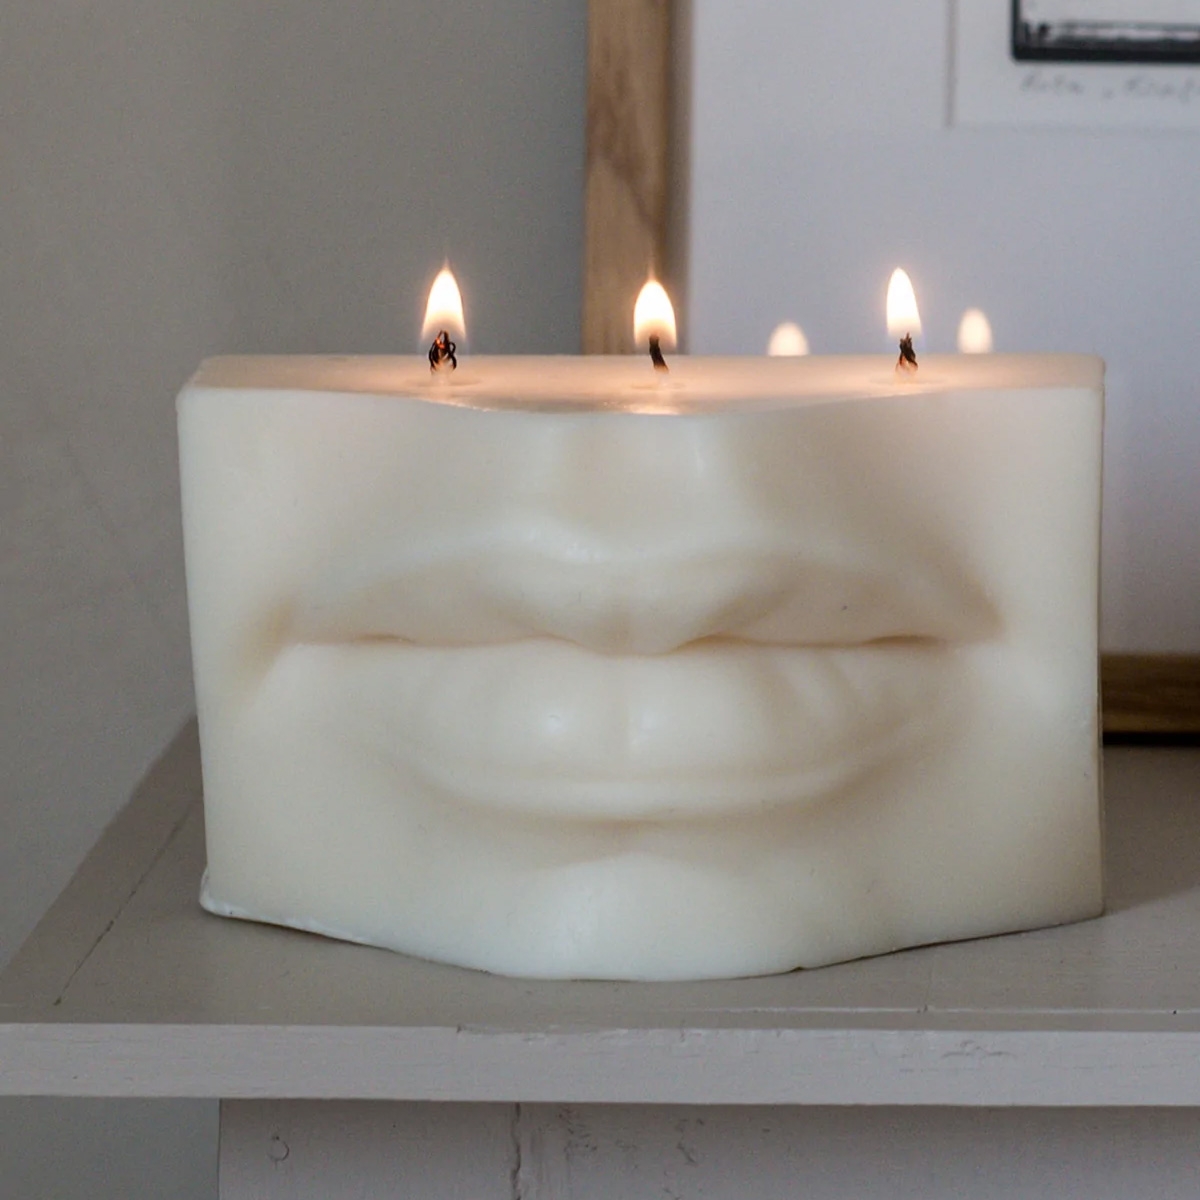 Davids Lips Soy Wax Vegan 3 Wick Candle In Ivory